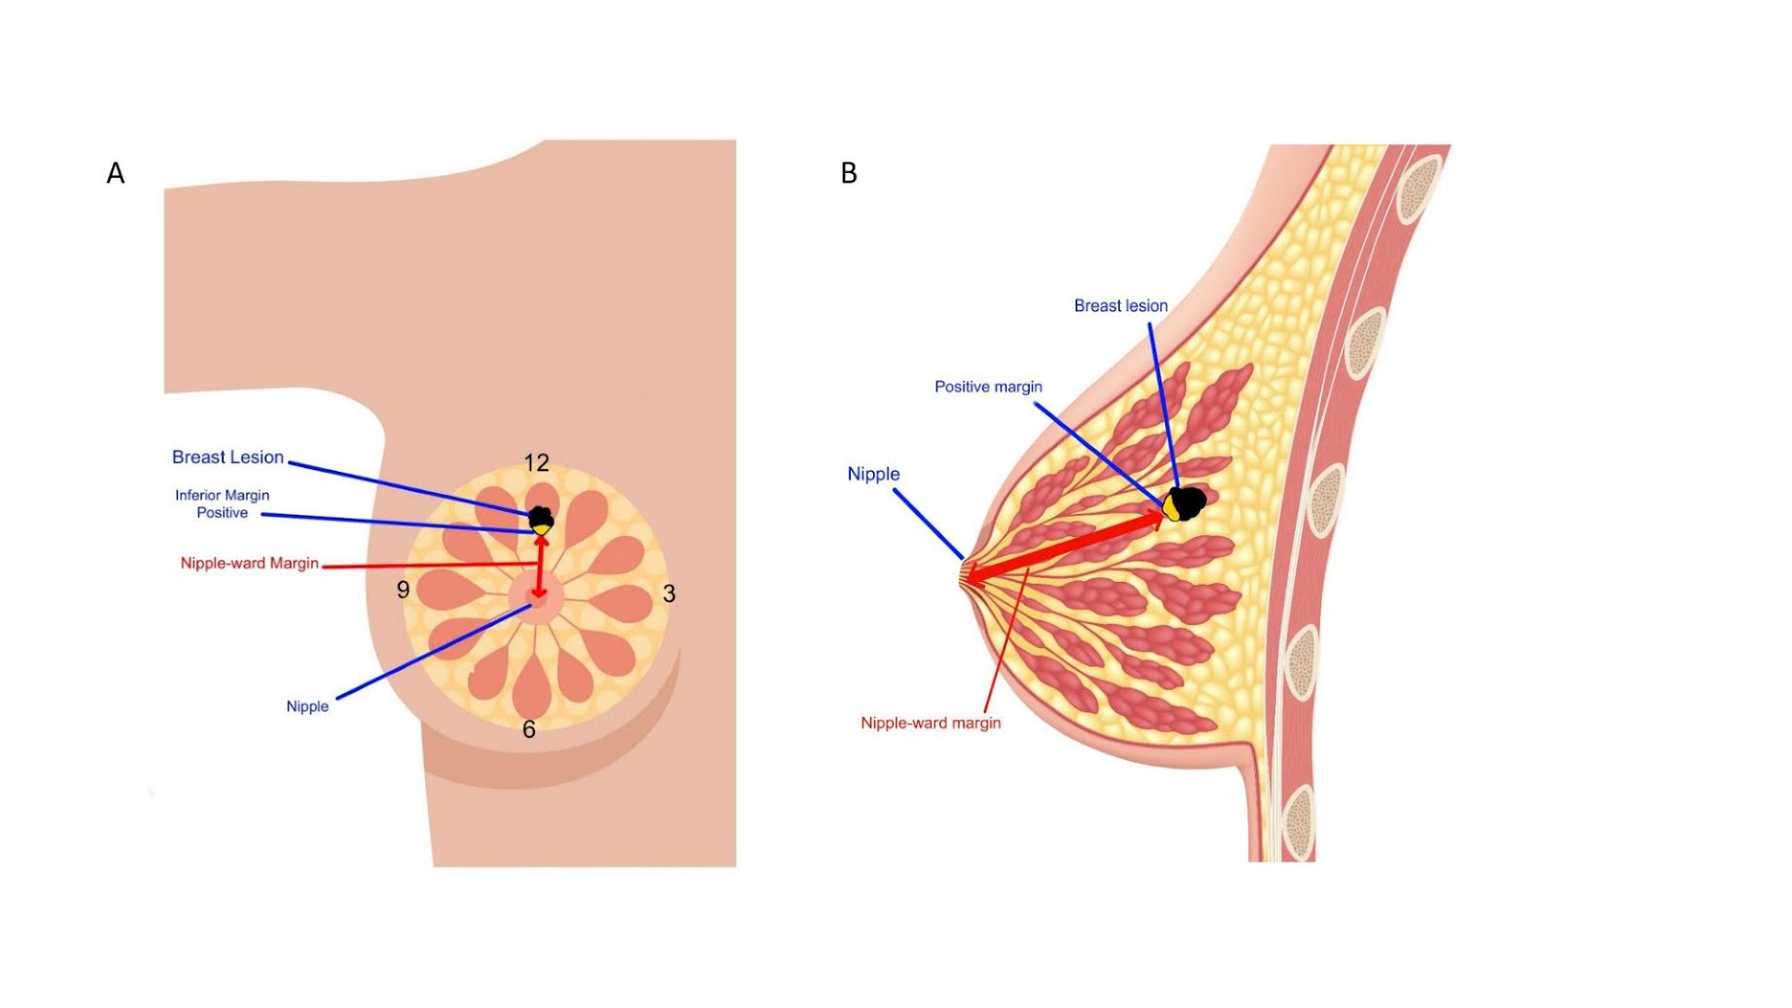 New Study Identifies Key Factor in Reducing Re-Excision Rates for Breast Cancer Lumpectomies